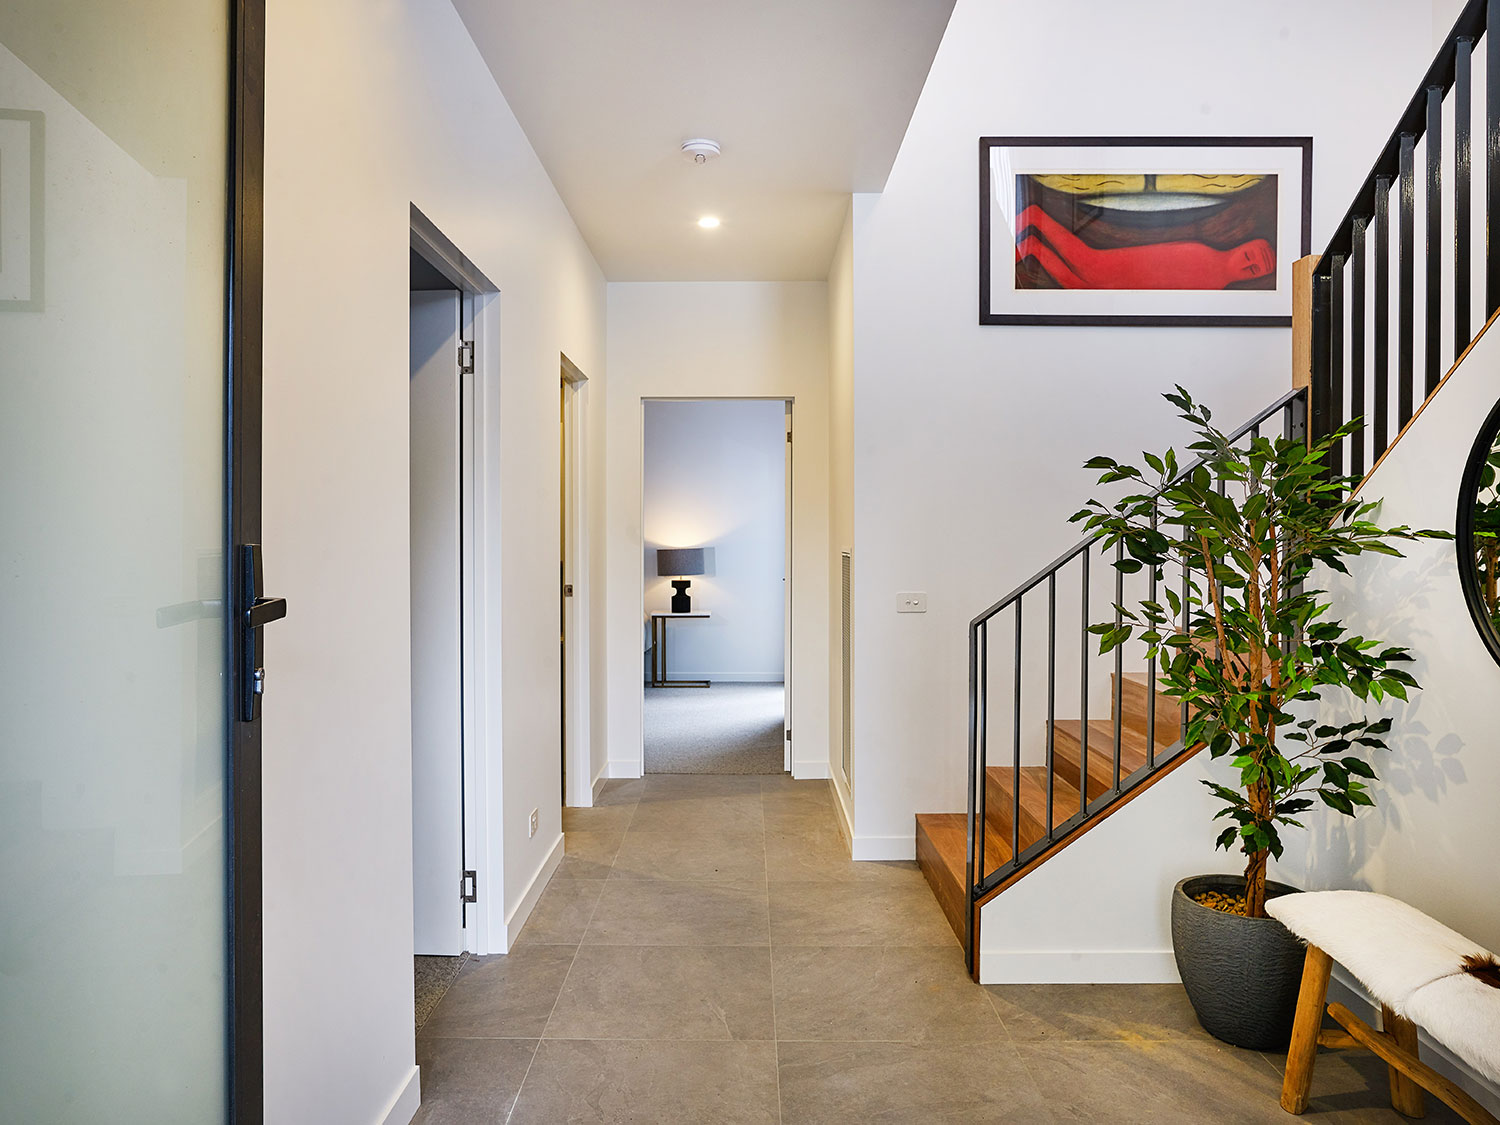 Art House Townhouses feature large formal entry areas